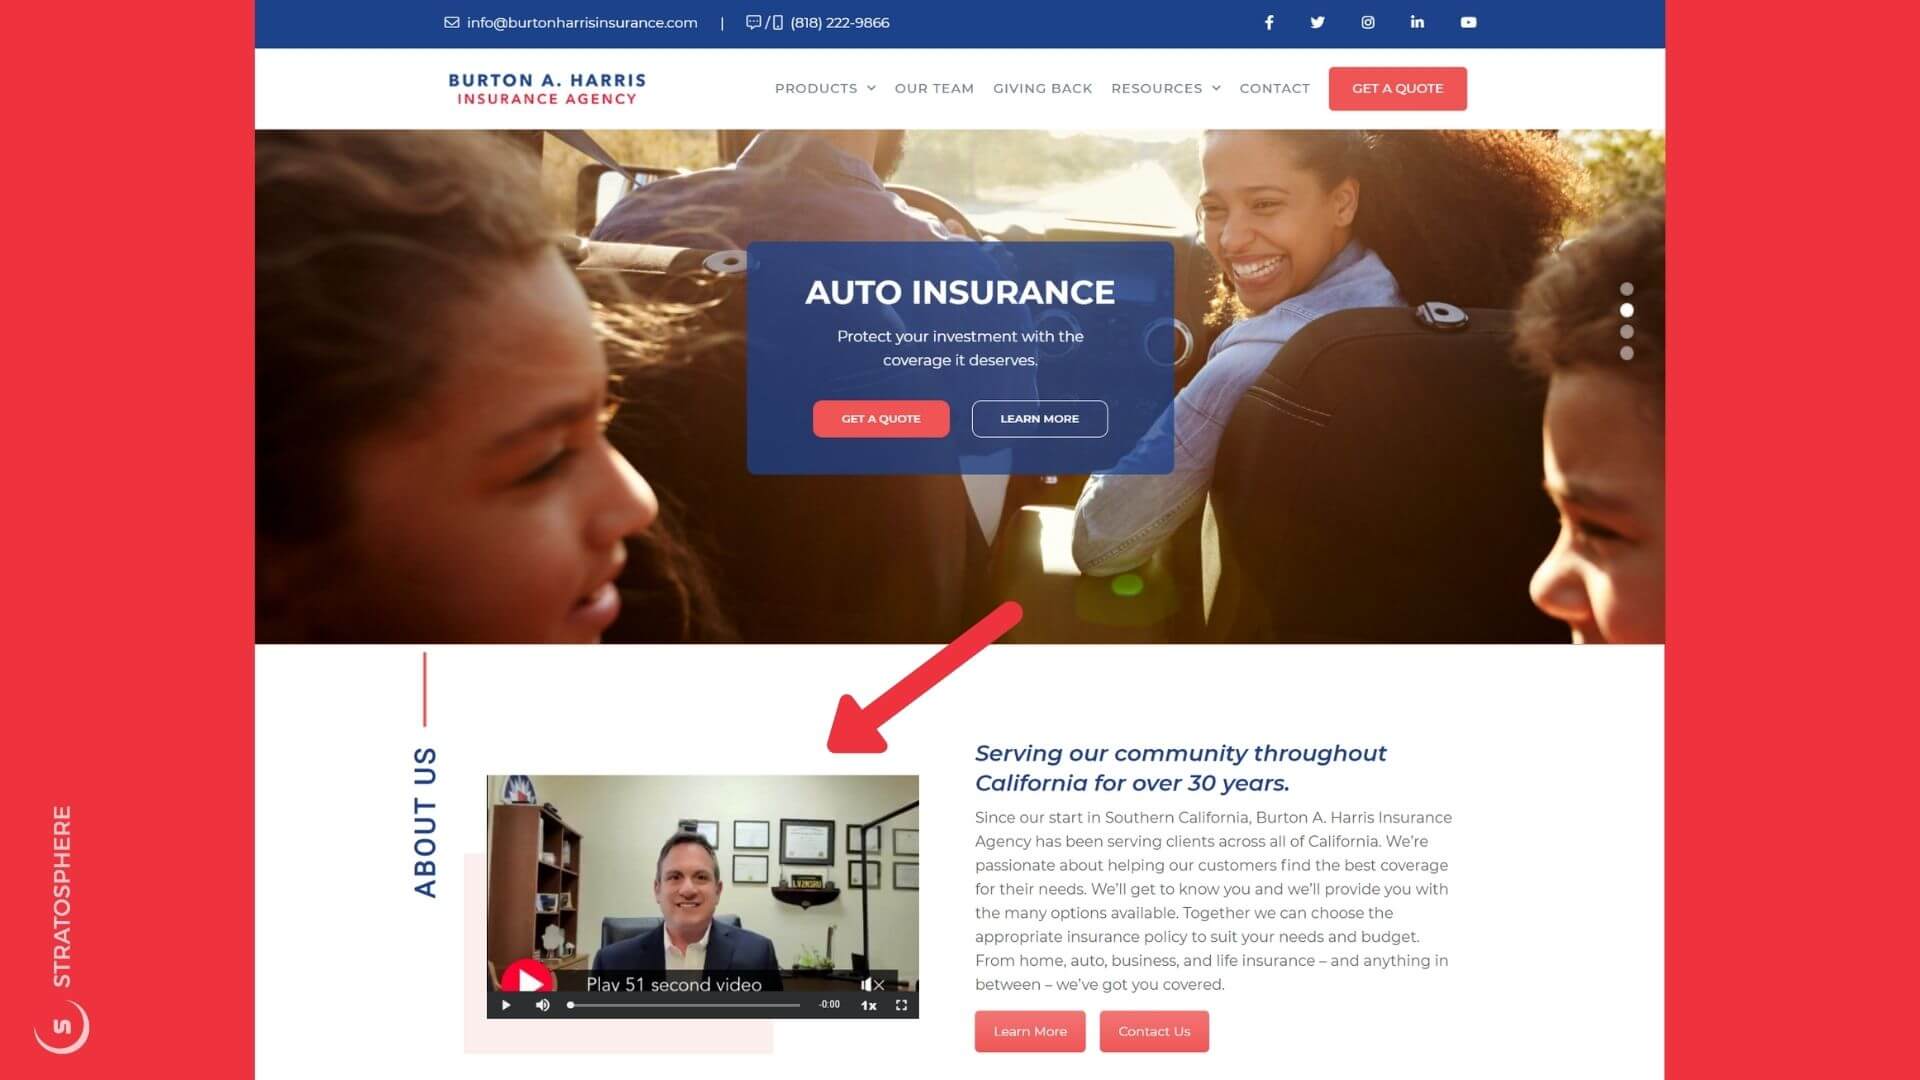 Picture of Burton Harris Insurance Agency Website Showing Owner's Video on Home Page